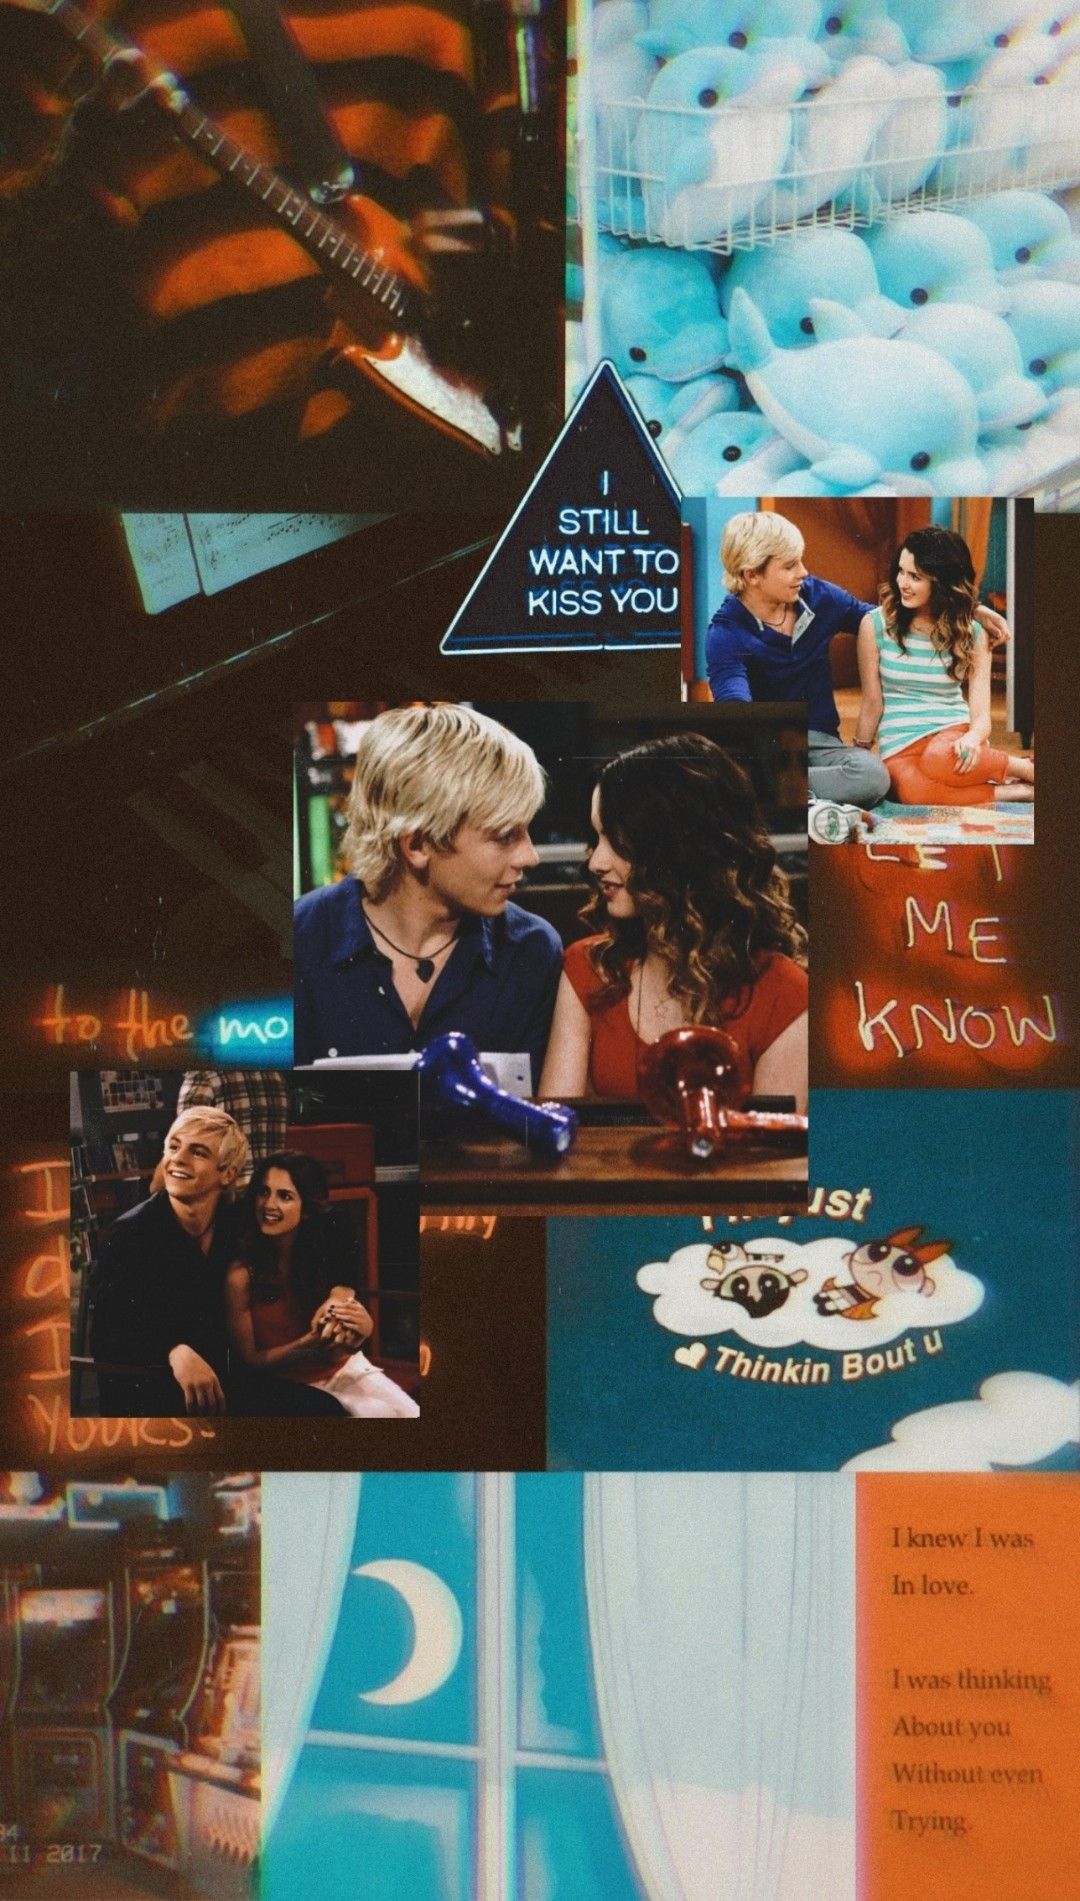 Austin and Ally (Auslly) aesthetic. Austin and ally, Austin moon, Disney channel aesthetic